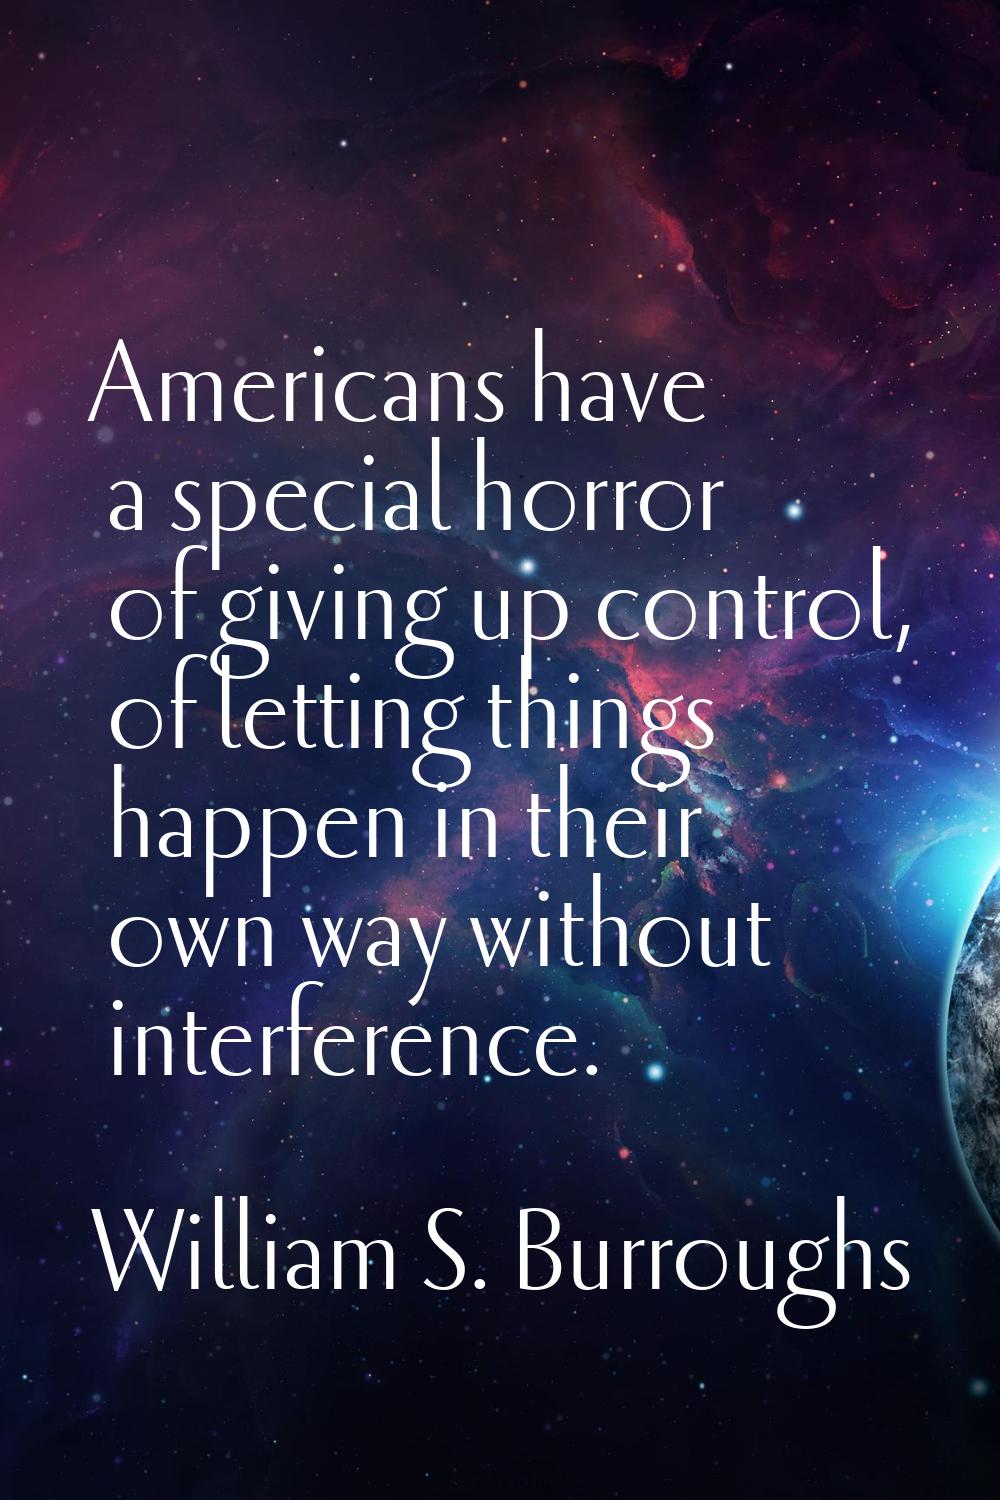 Americans have a special horror of giving up control, of letting things happen in their own way wit